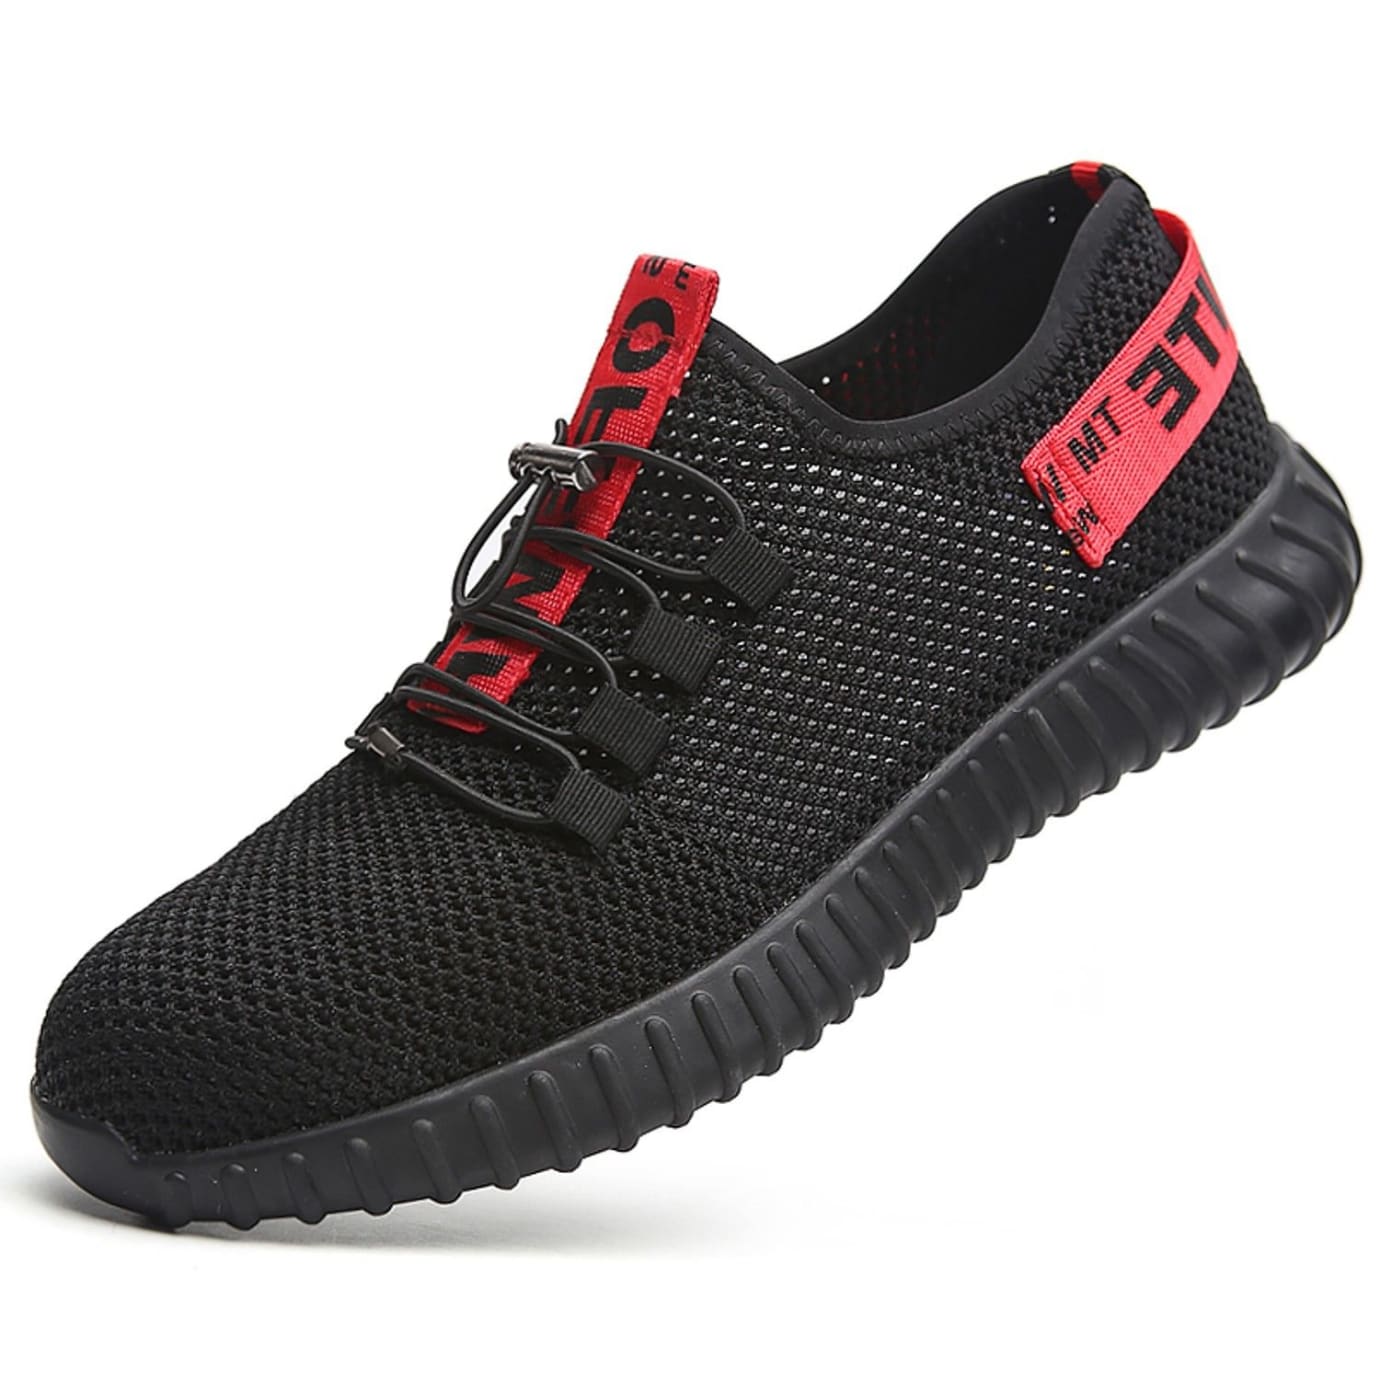 Fake Off-White x Yeezy Indestructible Sneakers (Black/Red)